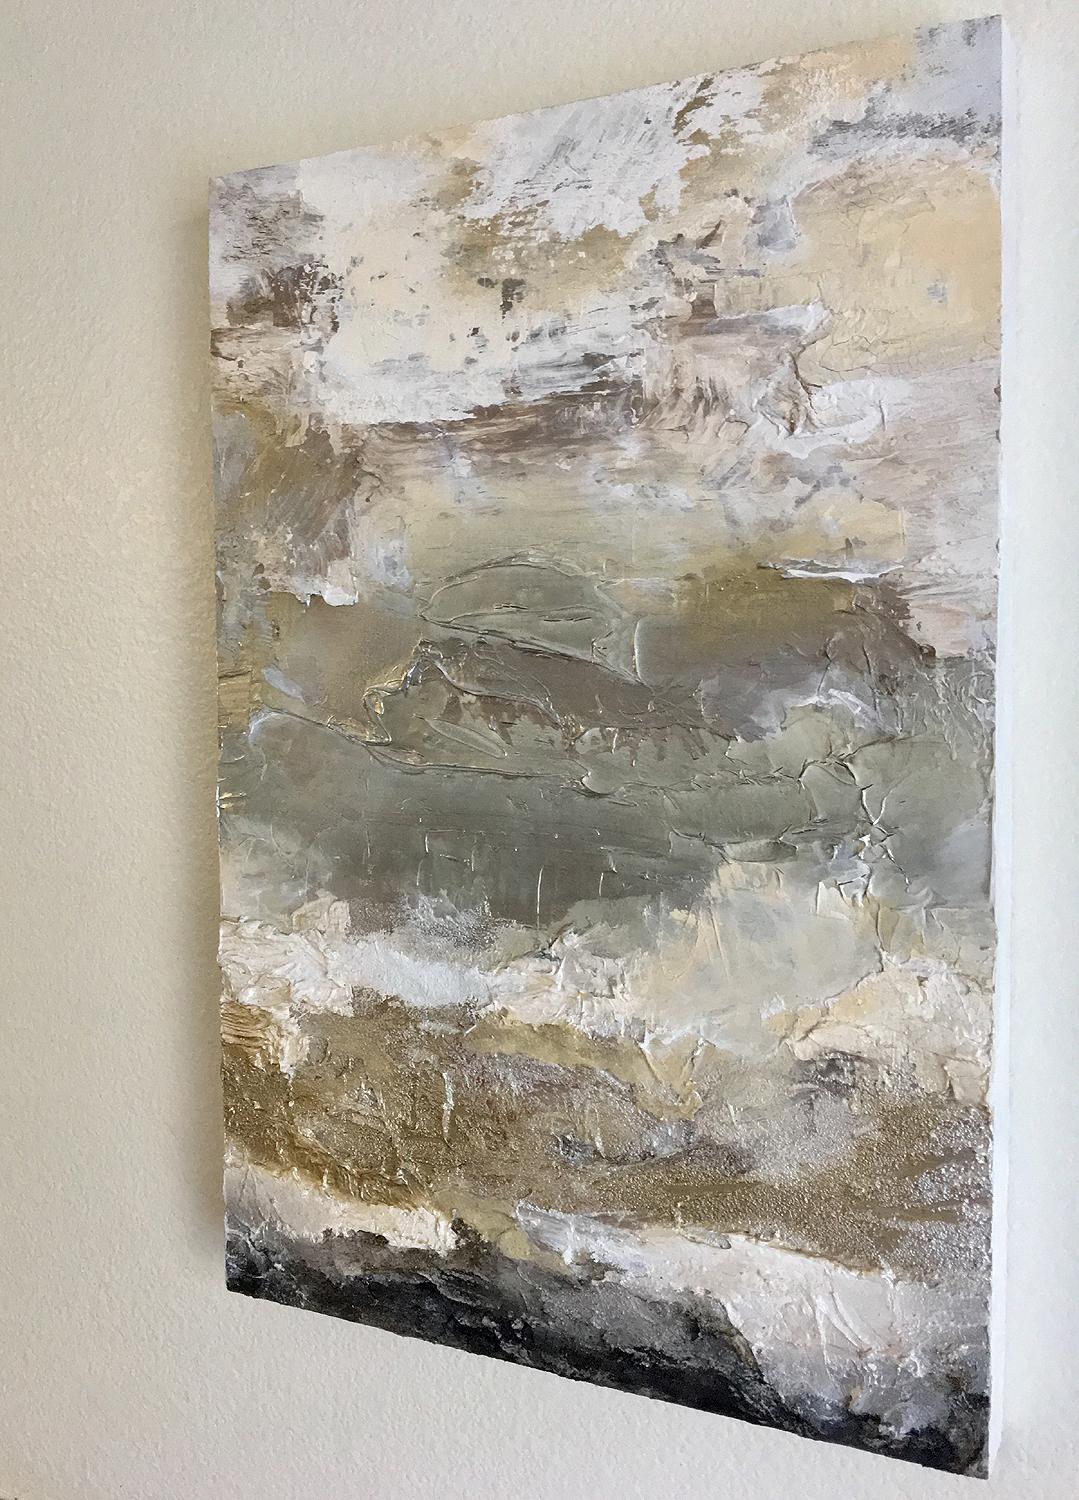 <p>Artist Comments<br /> My Sue;o - My Heart.   My inspiration came from a dream where I was painting en plein air in a beach setting. This series was painted on the beach in my dream and may be interpreted as purely abstract, landscape or